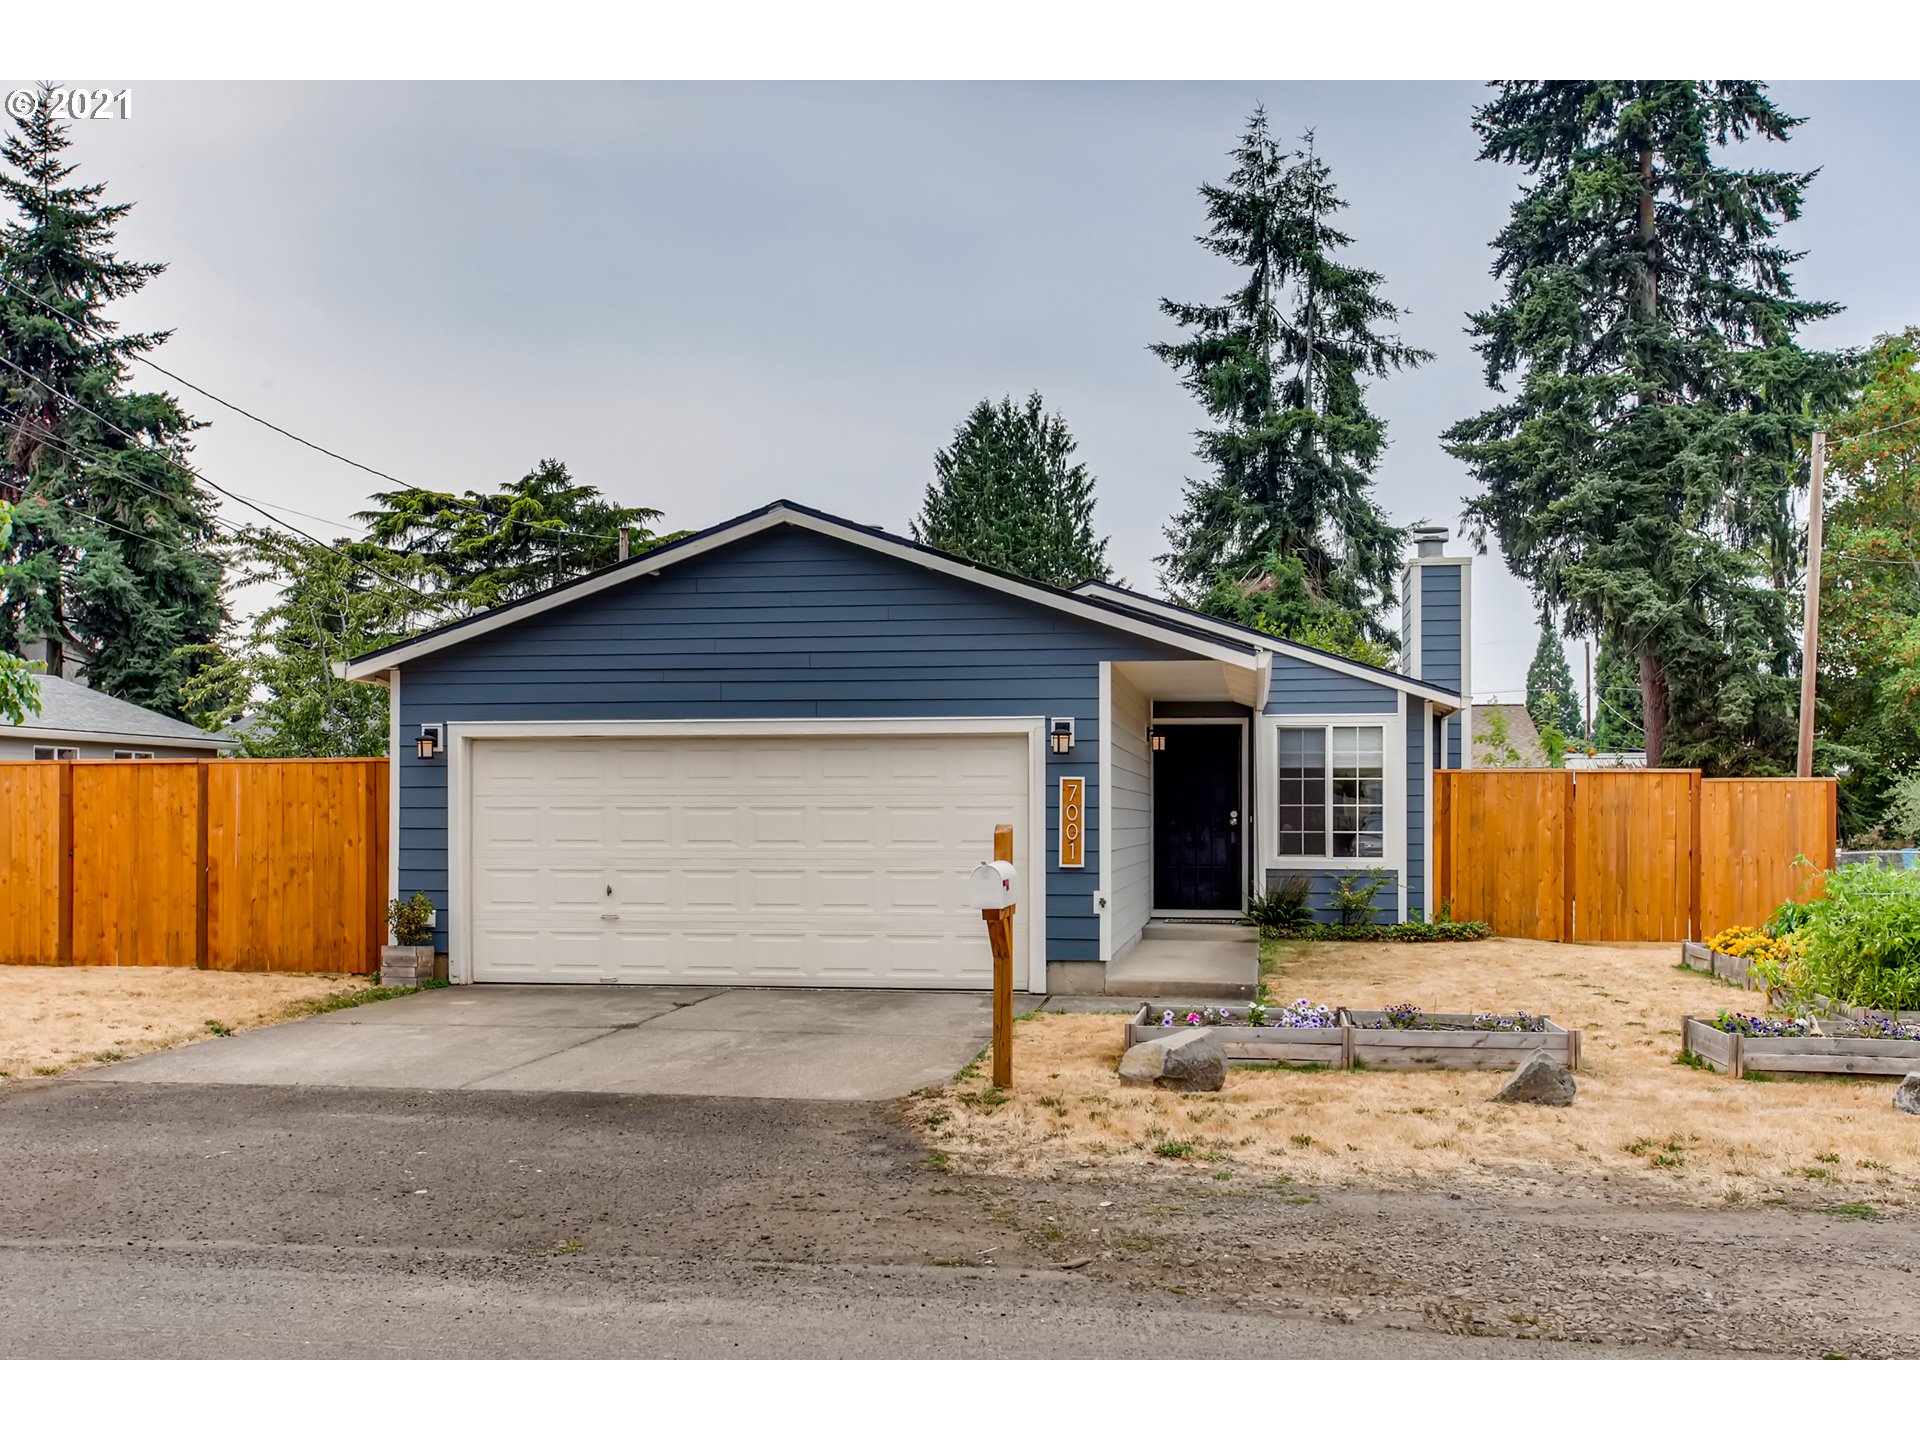 7001 SE 63RD AVE (1 of 32)